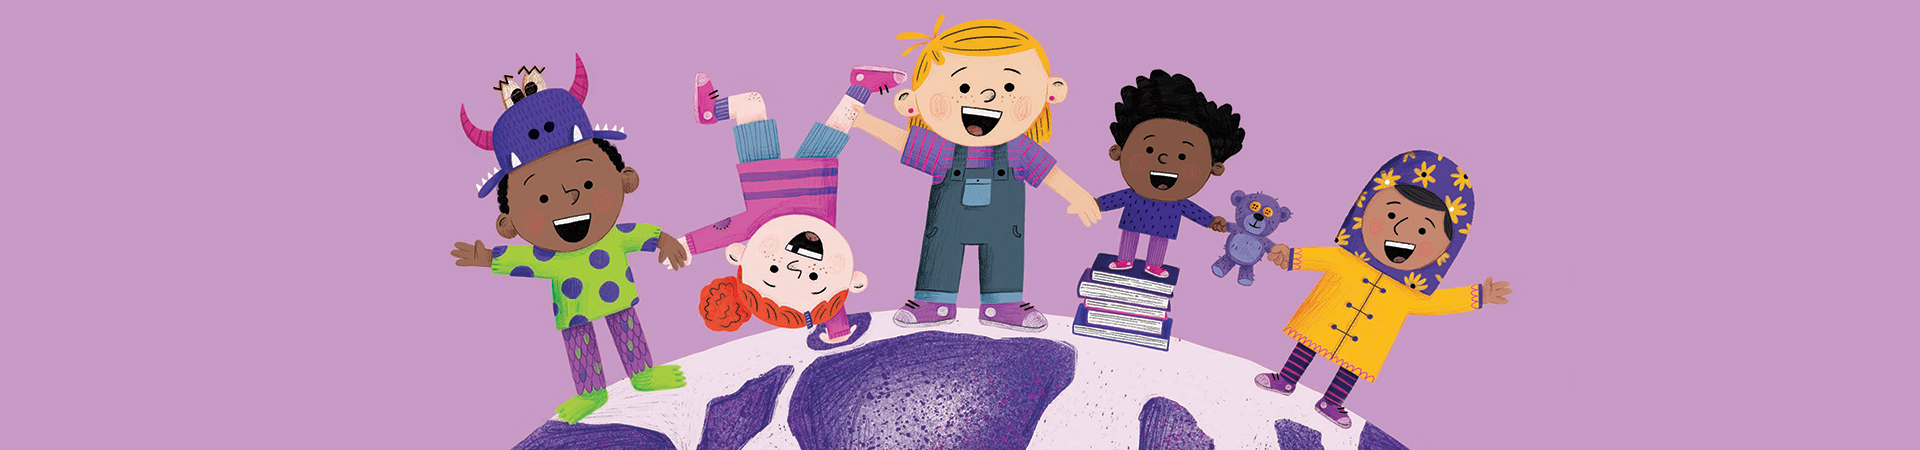  Illustration from the cover of "The World Needs More Purple People" by Kristin Bell 